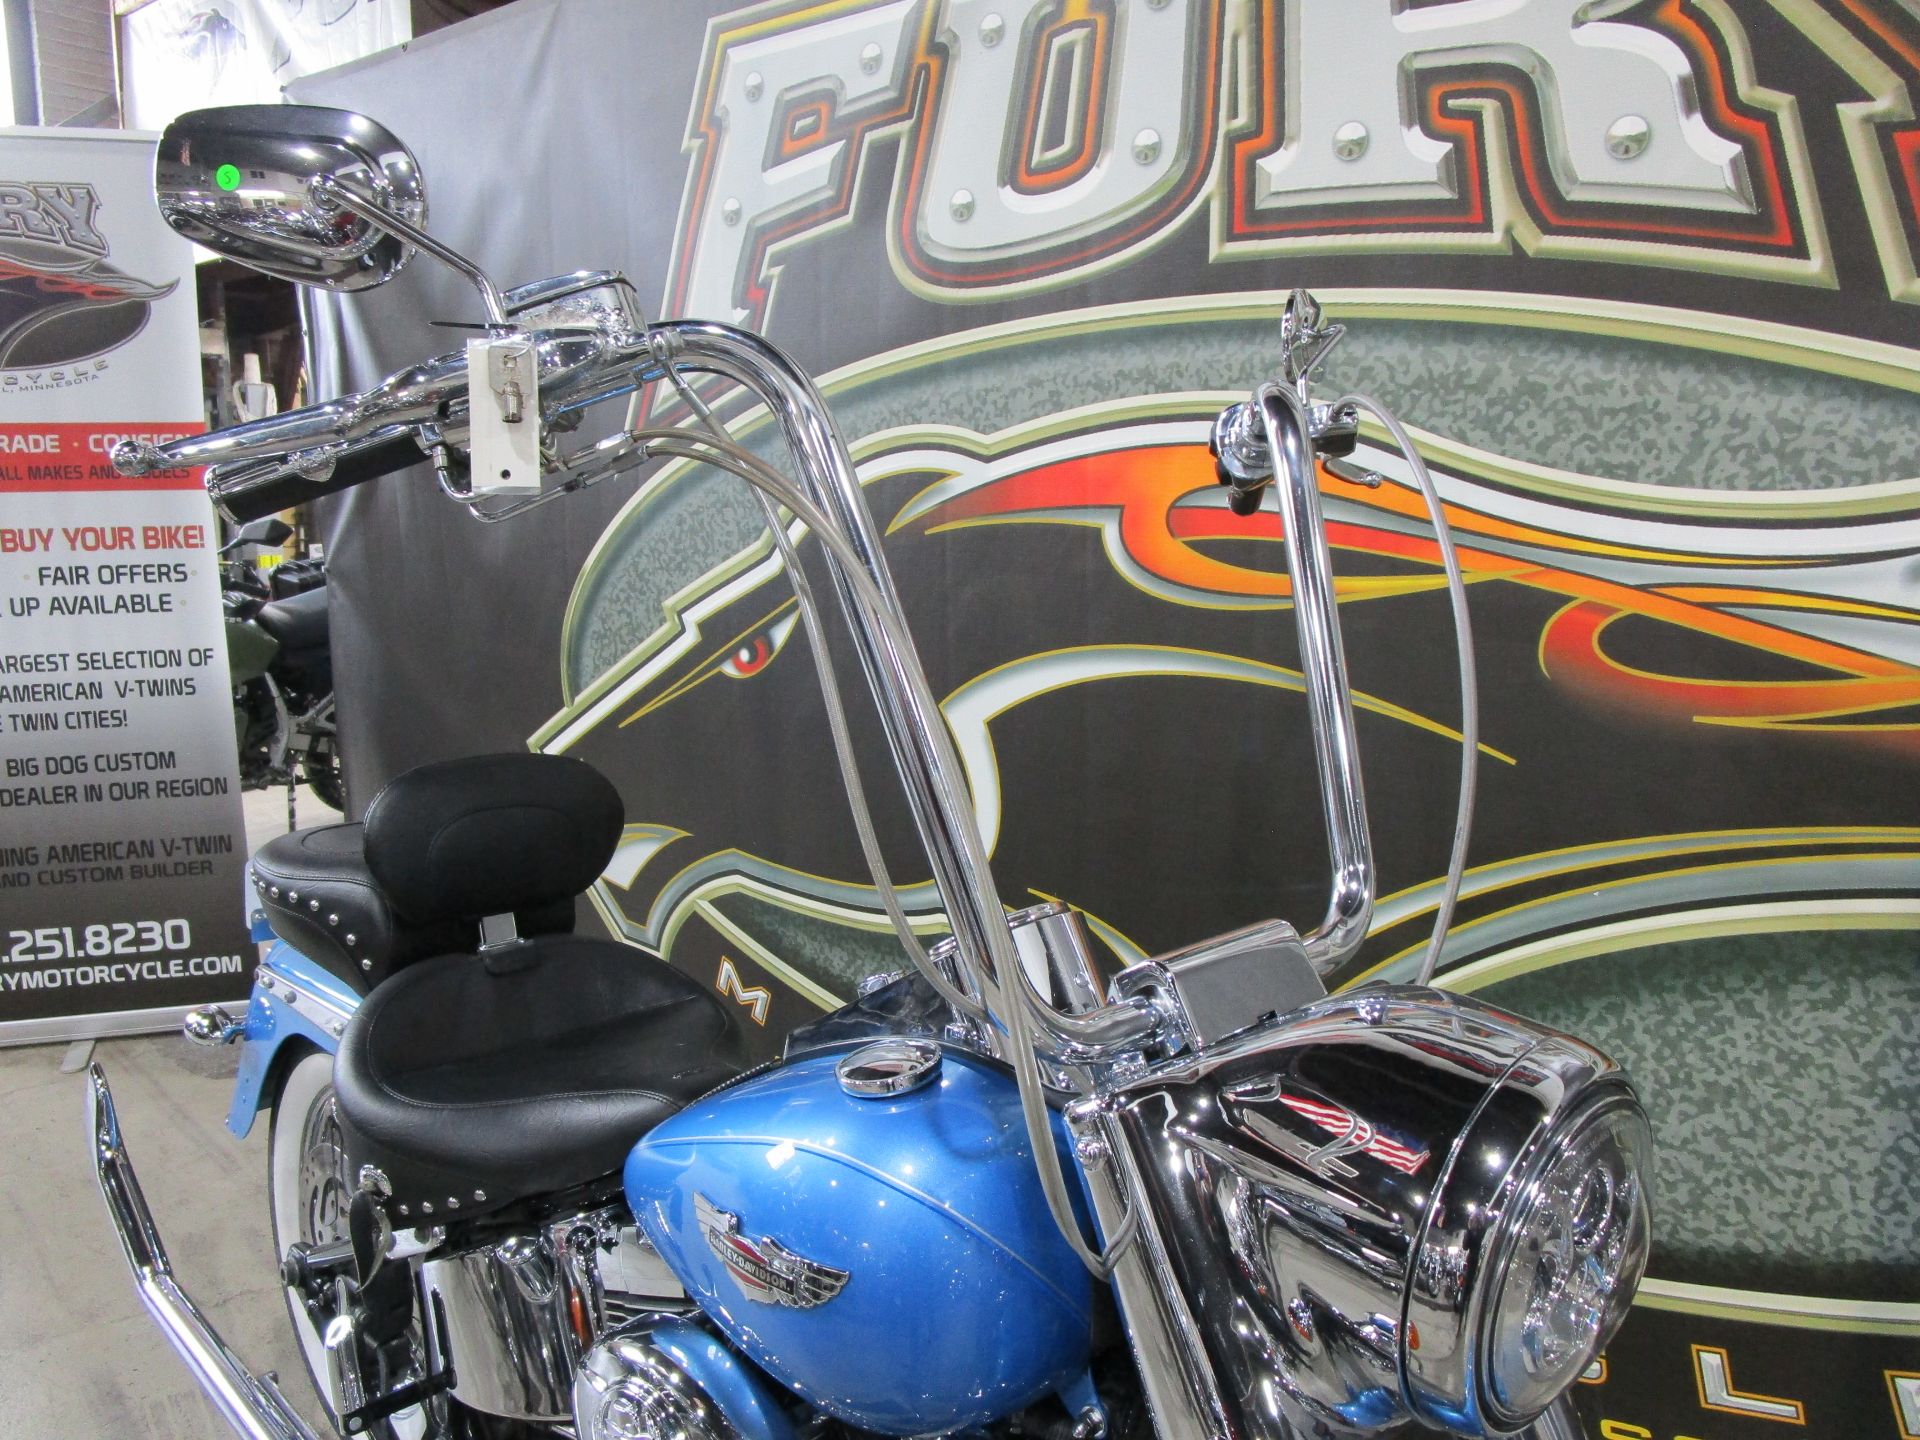 2011 Harley-Davidson Softail® Deluxe in South Saint Paul, Minnesota - Photo 4